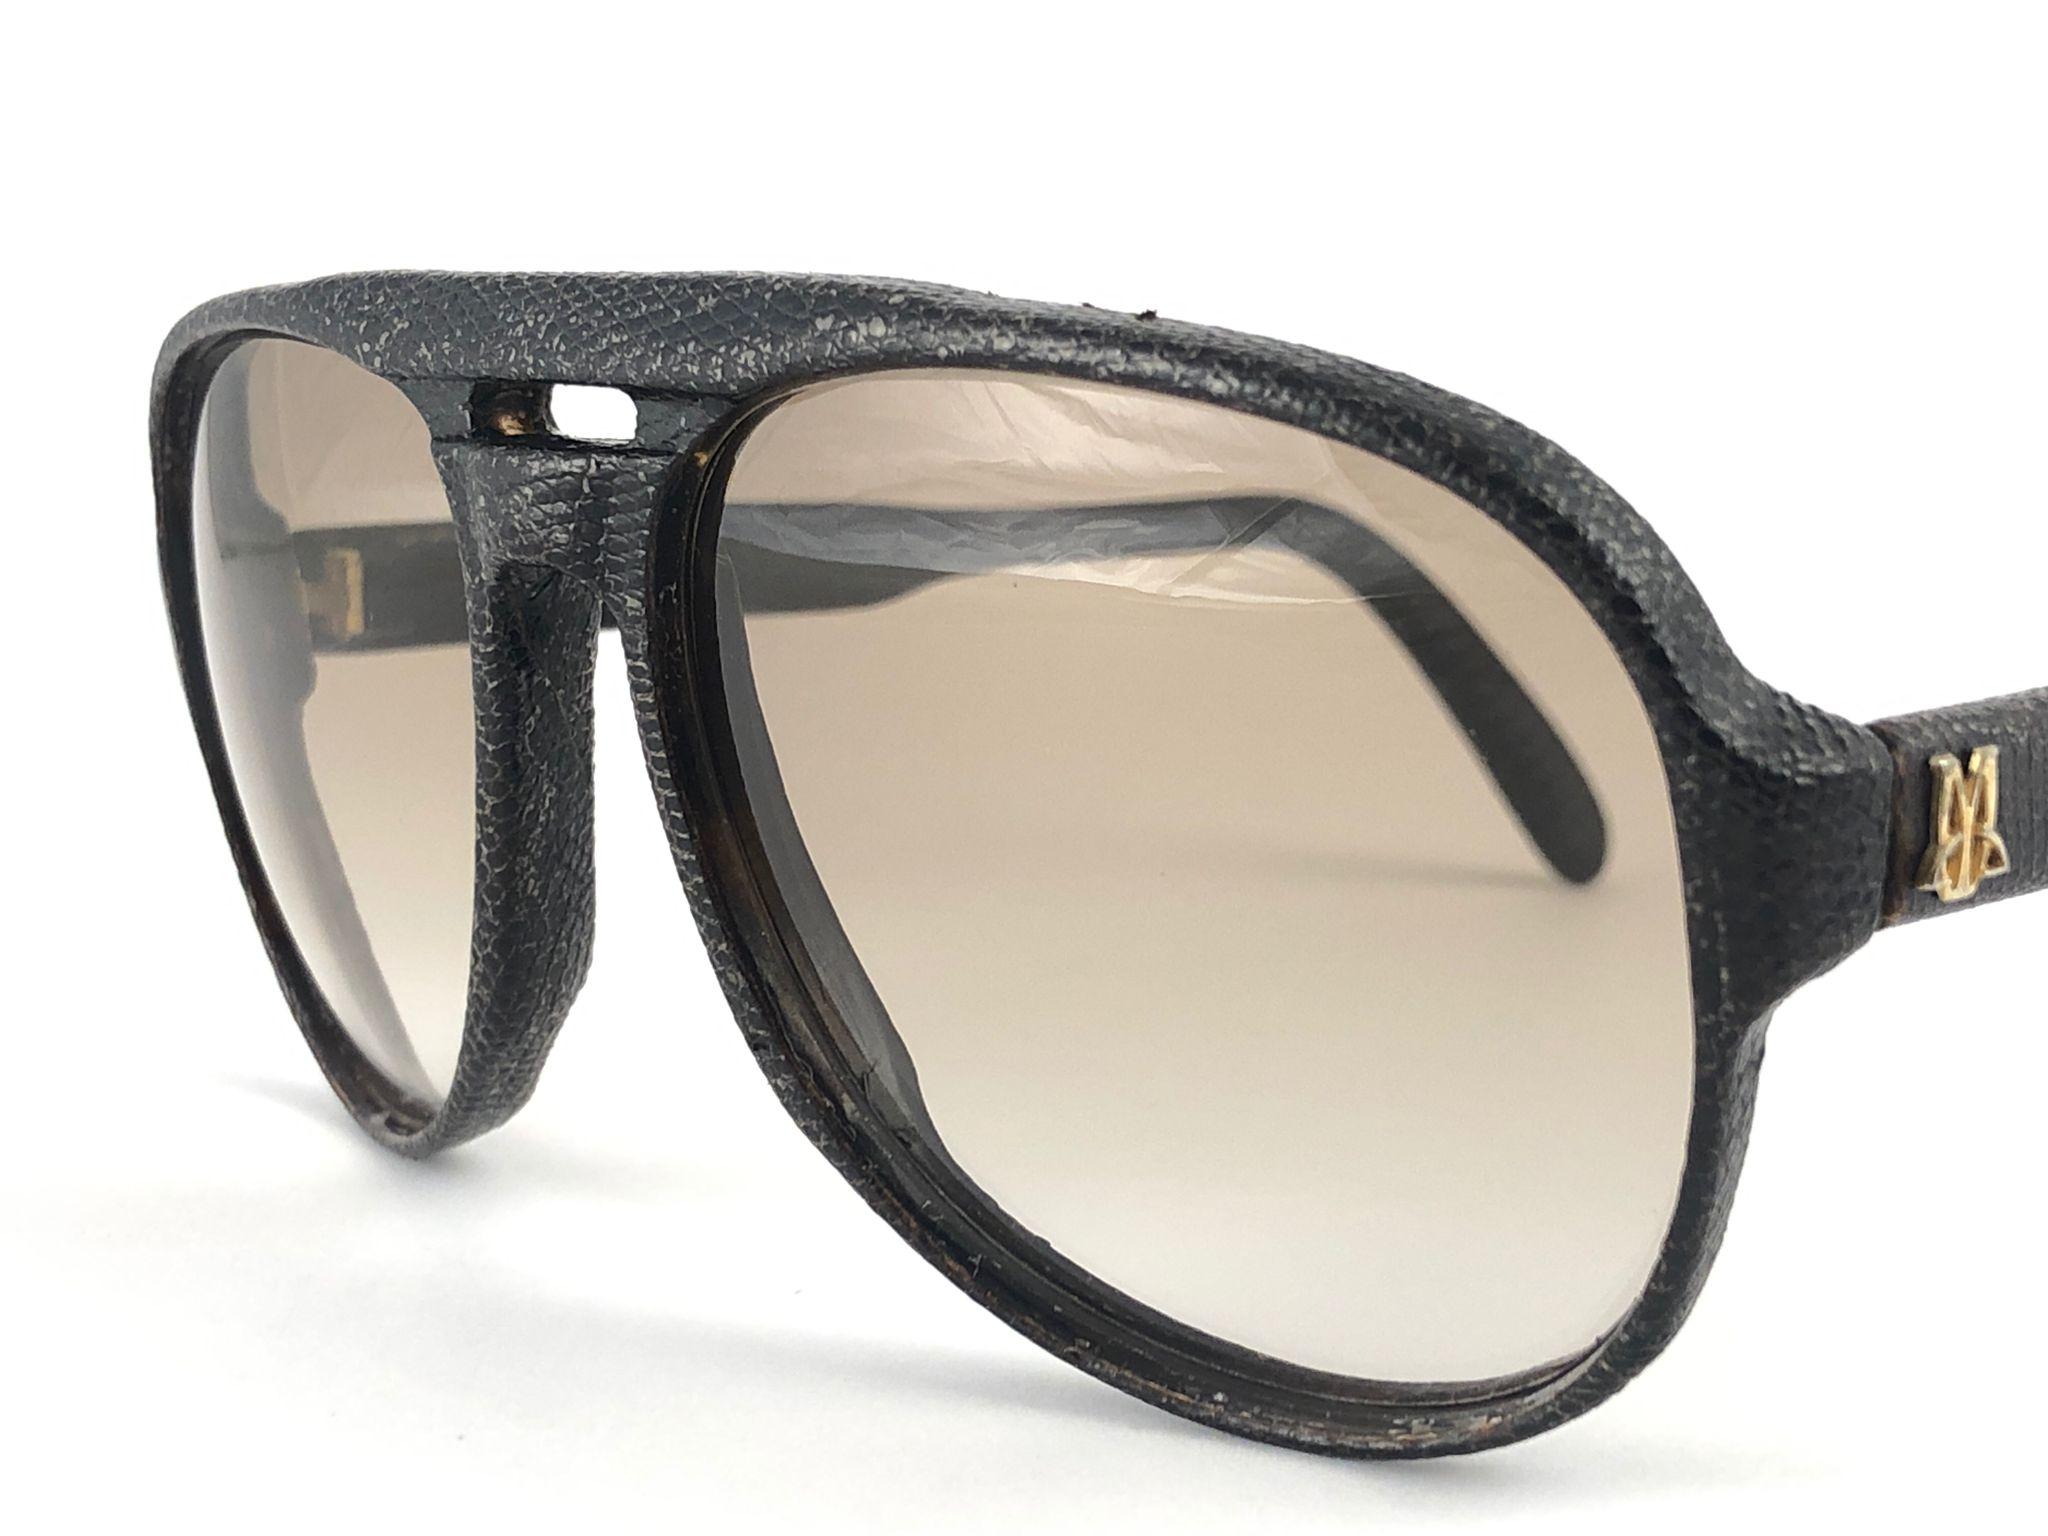 New, rare Maxim's de Paris completely lined with real lizard leather frame with legendary Maxim's logo on the temples holding a light brown gradient lenses 

Please notice that this item is nearly 40 years old and could show some storage wear.